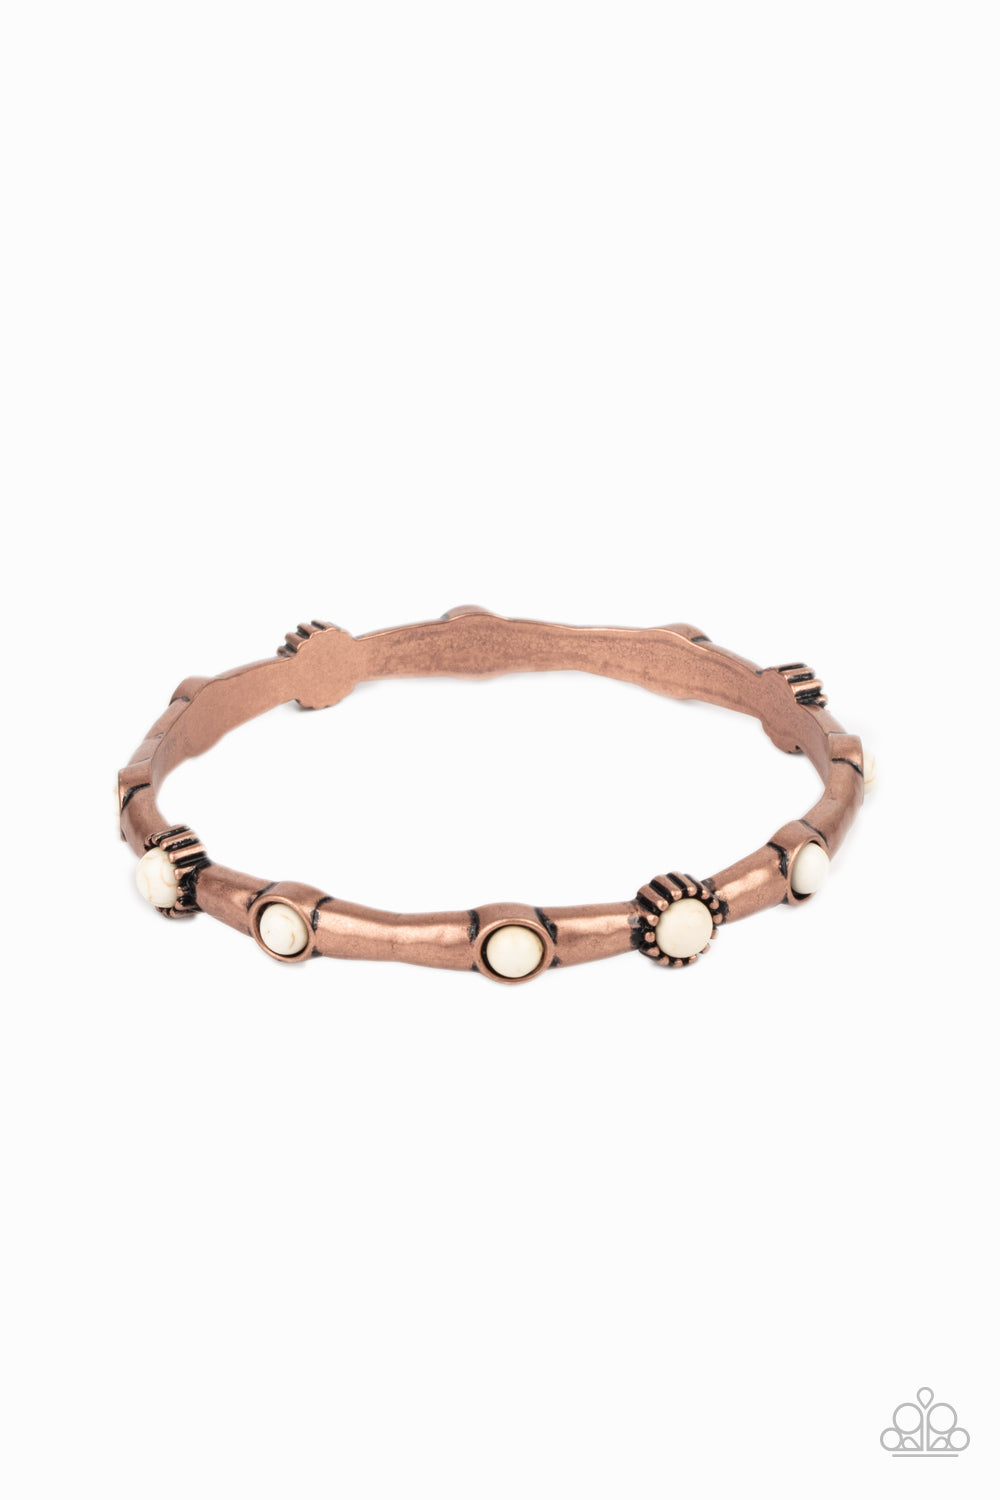 &lt;P&gt; Dotted with dainty white stones, a hammered copper bangle glides along the wrist for a colorfully earthy look.&lt;/P&gt;  

&lt;P&gt; &lt;I&gt;Sold as one individual bracelet.&lt;/I&gt;  &lt;/P&gt;


&lt;img src=\&quot;https://d9b54x484lq62.cloudfront.net/paparazzi/shopping/images/517_tag150x115_1.png\&quot; alt=\&quot;New Kit\&quot; align=\&quot;middle\&quot; height=\&quot;50\&quot; width=\&quot;50\&quot;/&gt;